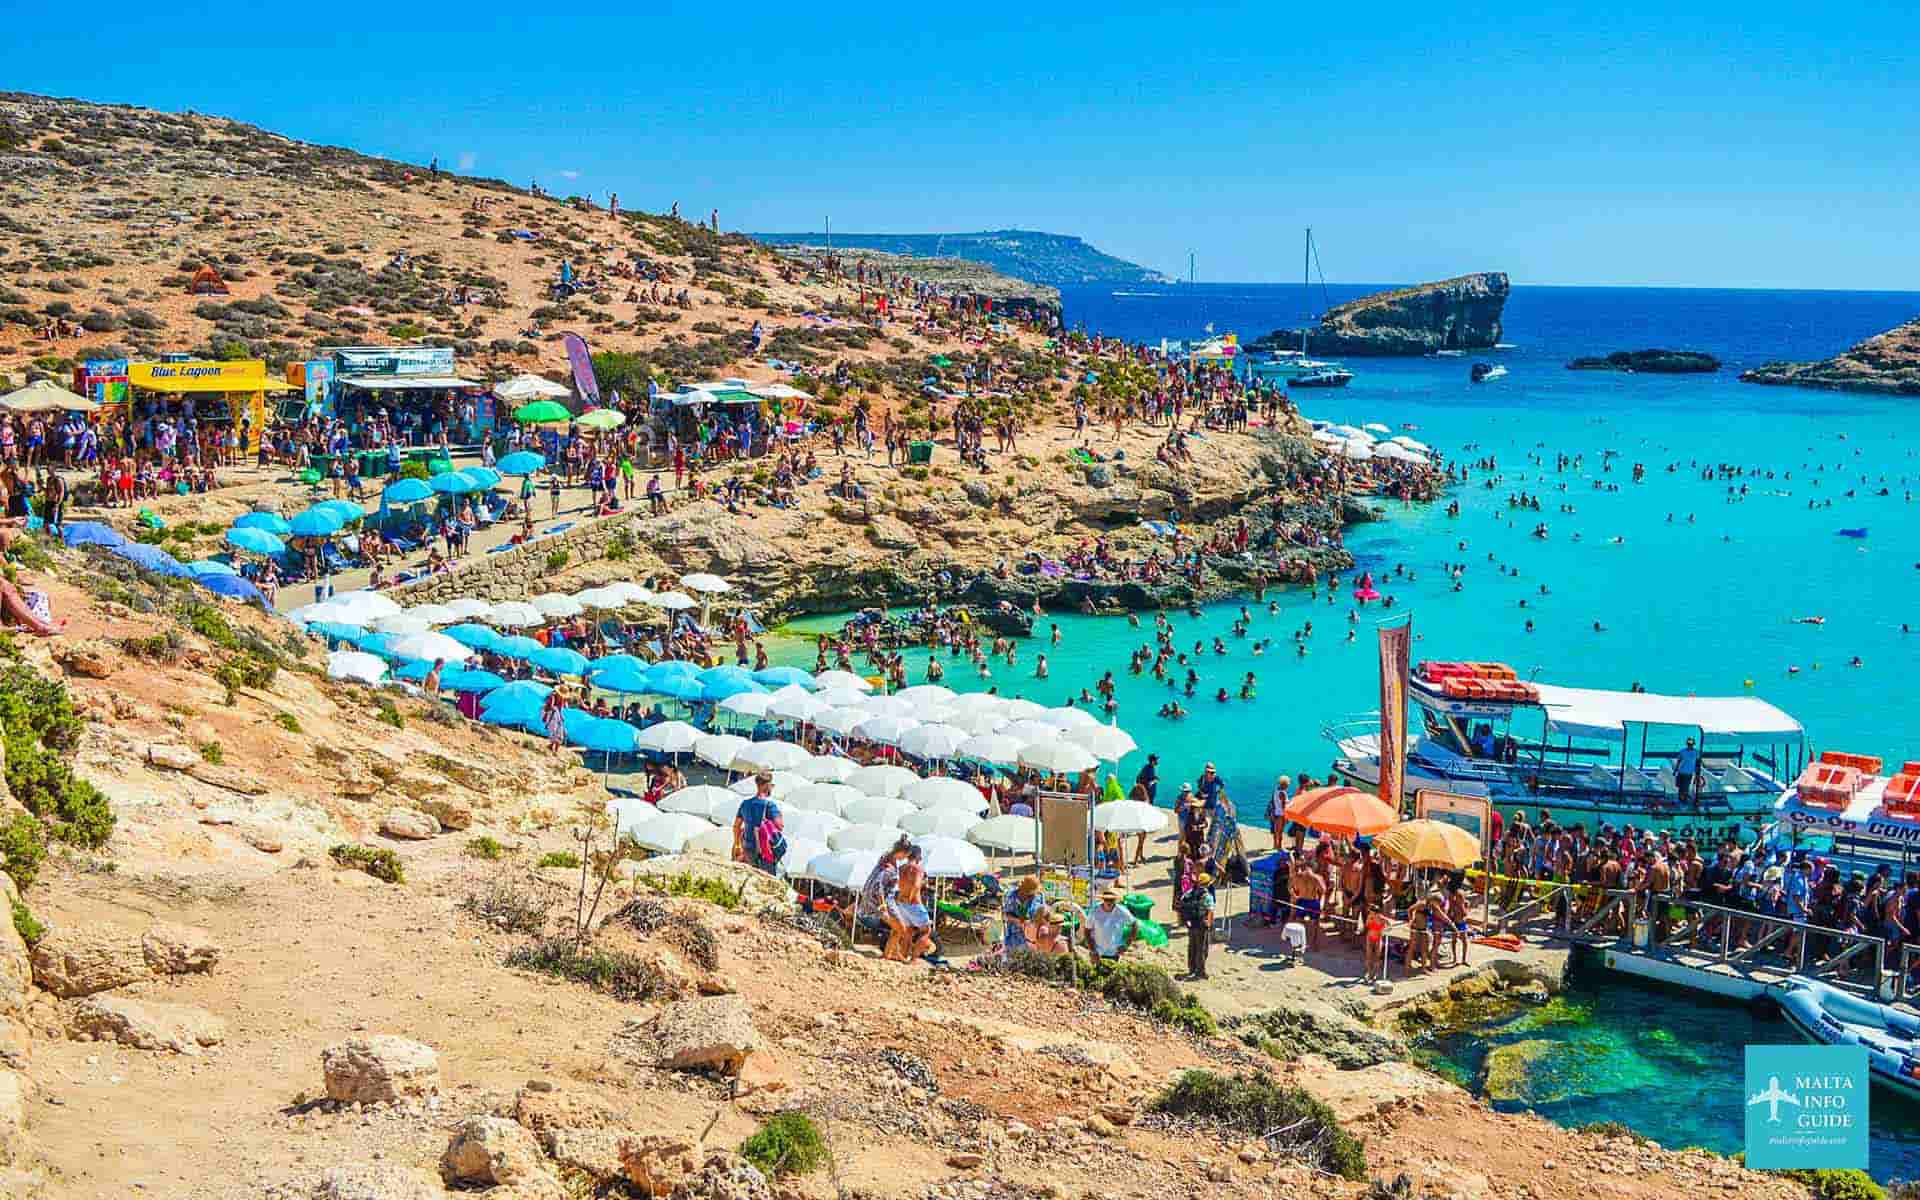 People swarming the island of Comino on a hot summer day.